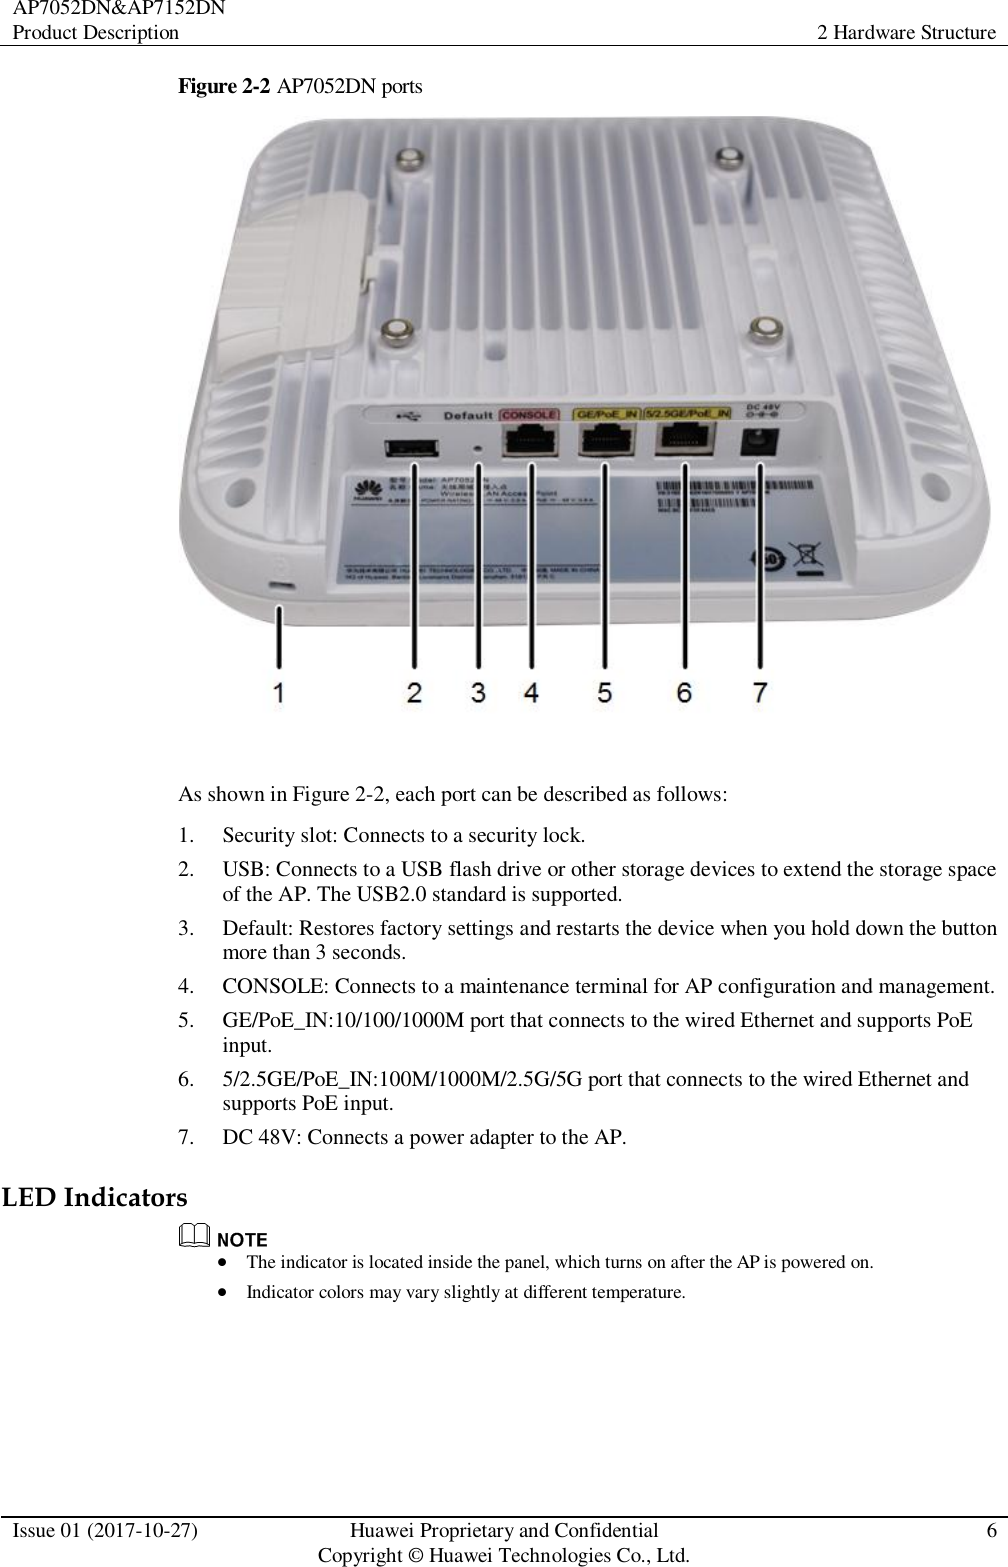 AP7052DN&amp;AP7152DN Product Description 2 Hardware Structure  Issue 01 (2017-10-27) Huawei Proprietary and Confidential                                     Copyright © Huawei Technologies Co., Ltd. 6  Figure 2-2 AP7052DN ports   As shown in Figure 2-2, each port can be described as follows: 1. Security slot: Connects to a security lock. 2. USB: Connects to a USB flash drive or other storage devices to extend the storage space of the AP. The USB2.0 standard is supported. 3. Default: Restores factory settings and restarts the device when you hold down the button more than 3 seconds. 4. CONSOLE: Connects to a maintenance terminal for AP configuration and management. 5. GE/PoE_IN:10/100/1000M port that connects to the wired Ethernet and supports PoE input. 6. 5/2.5GE/PoE_IN:100M/1000M/2.5G/5G port that connects to the wired Ethernet and supports PoE input. 7. DC 48V: Connects a power adapter to the AP. LED Indicators   The indicator is located inside the panel, which turns on after the AP is powered on.  Indicator colors may vary slightly at different temperature. 